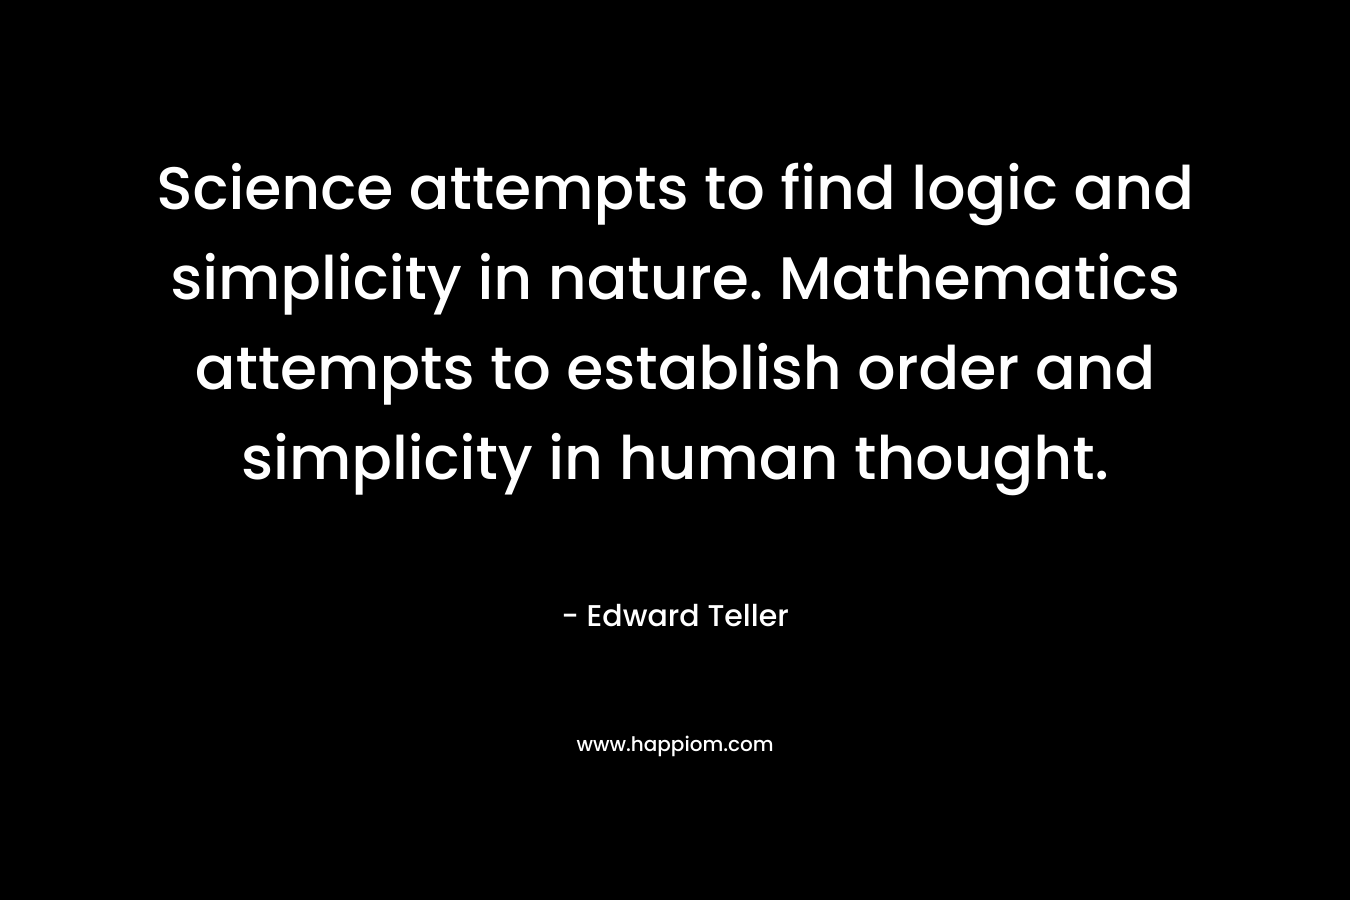 Science attempts to find logic and simplicity in nature. Mathematics attempts to establish order and simplicity in human thought.